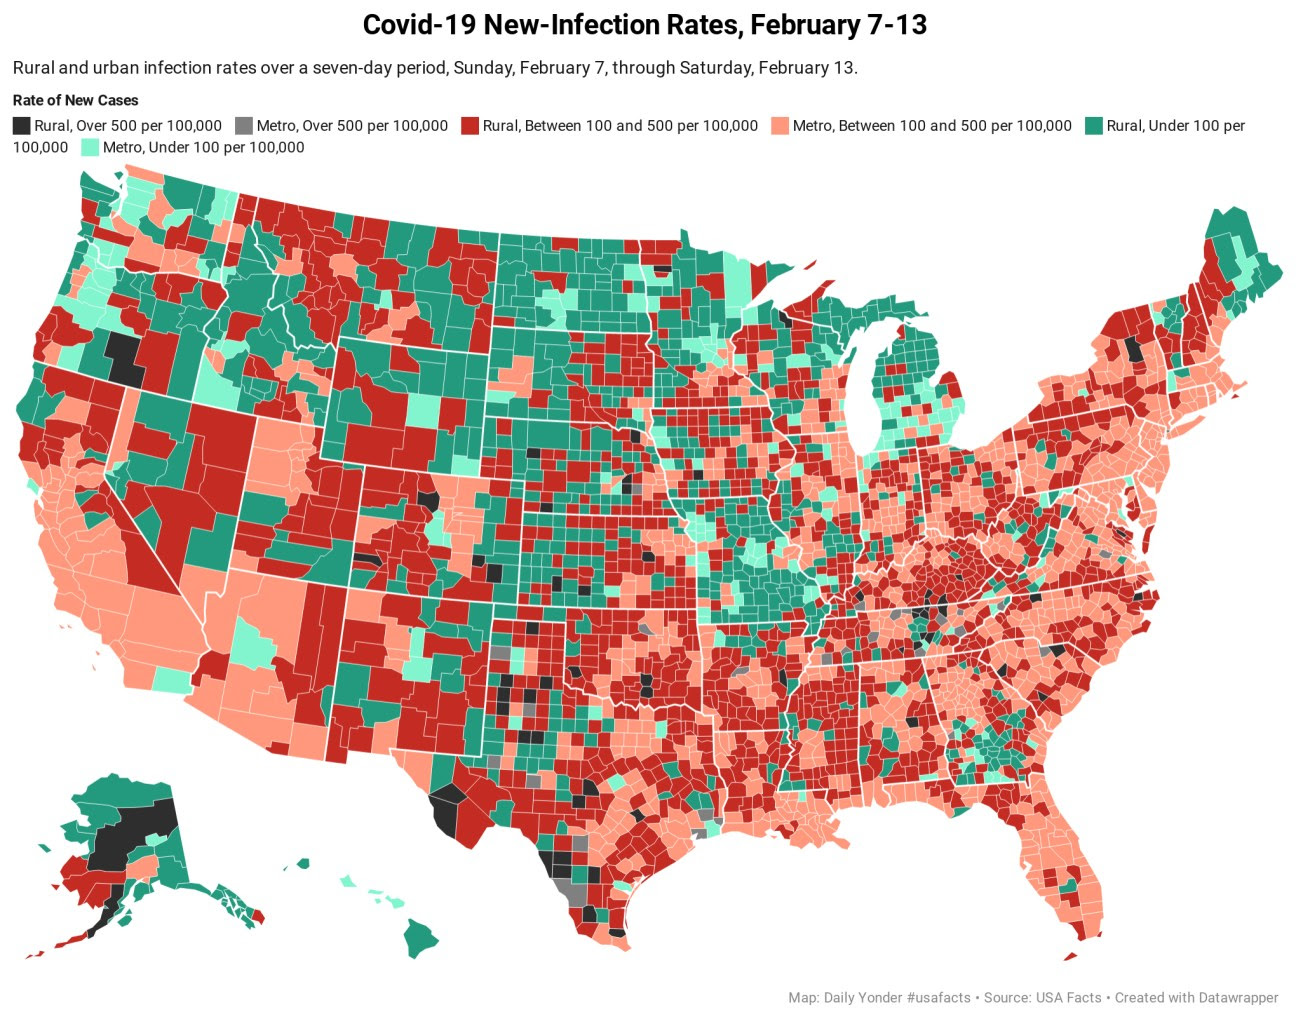 LEDE-covid-19-new-infection-rates-february-7-13-1296x1019.jpg